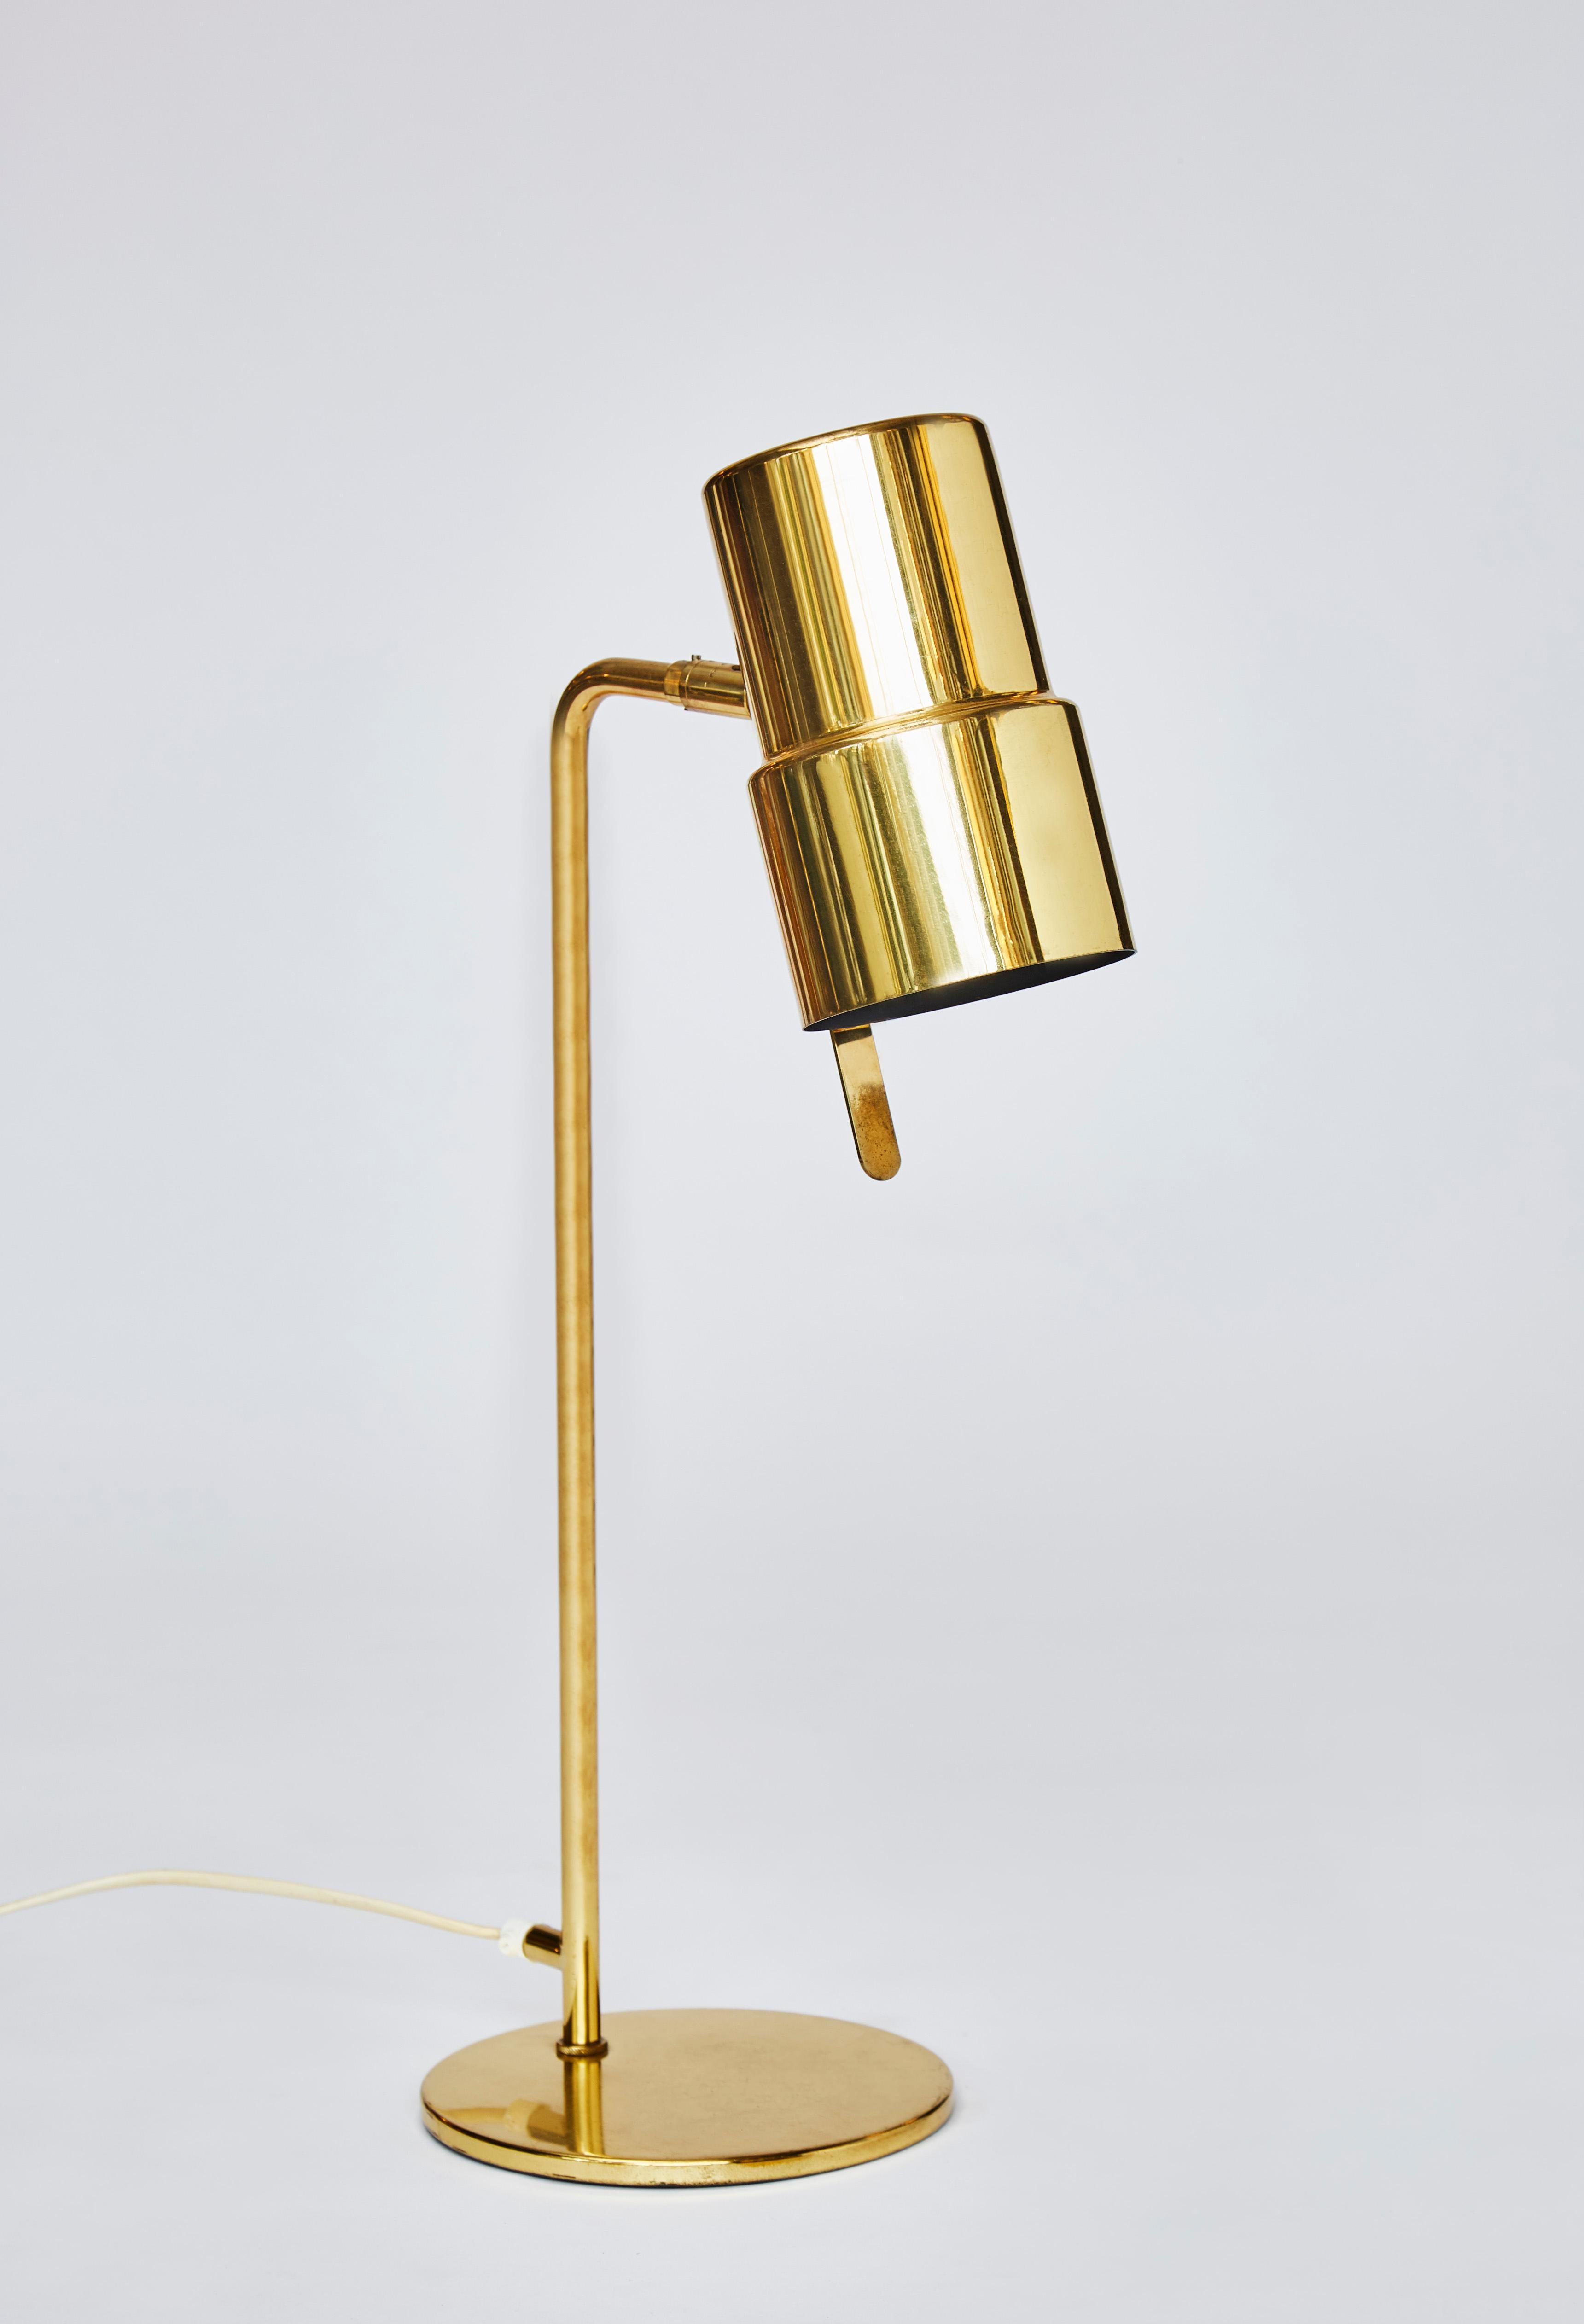 Pair of B195/2 table lamps designed by Hans Agne Jakobsson in brass, round foot and adjustable sconce.